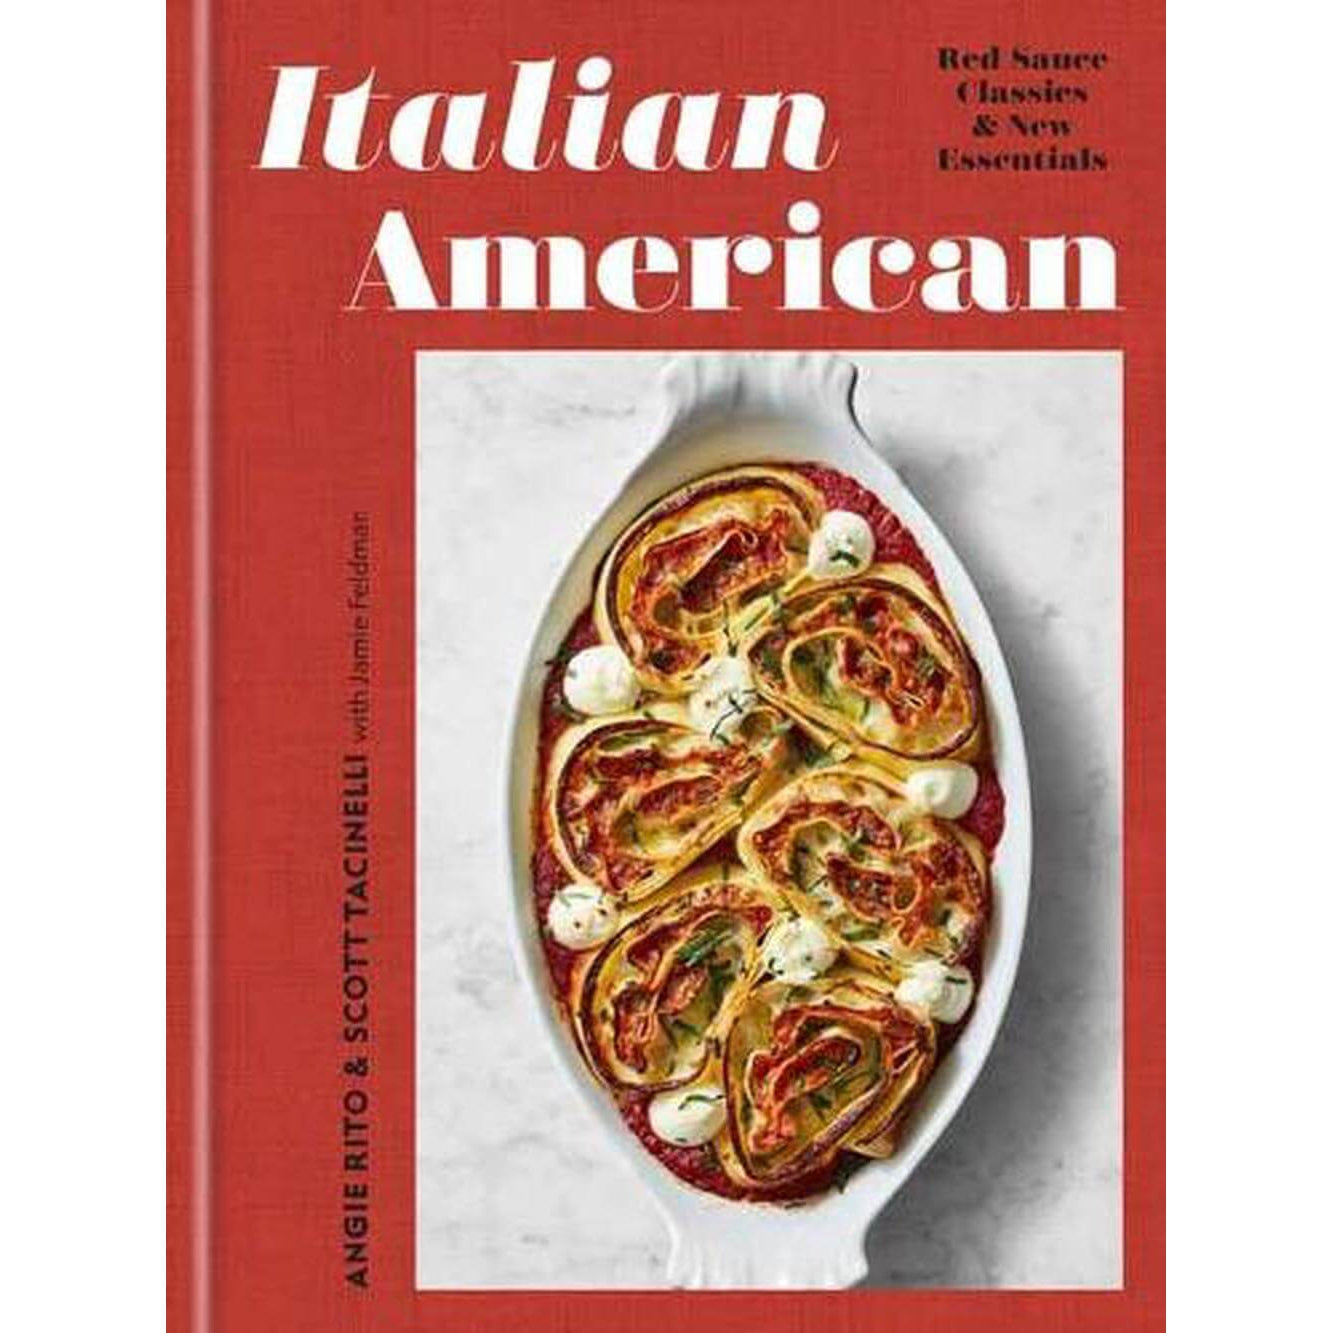 Italian American: Red Sauce Classics and New Essentials